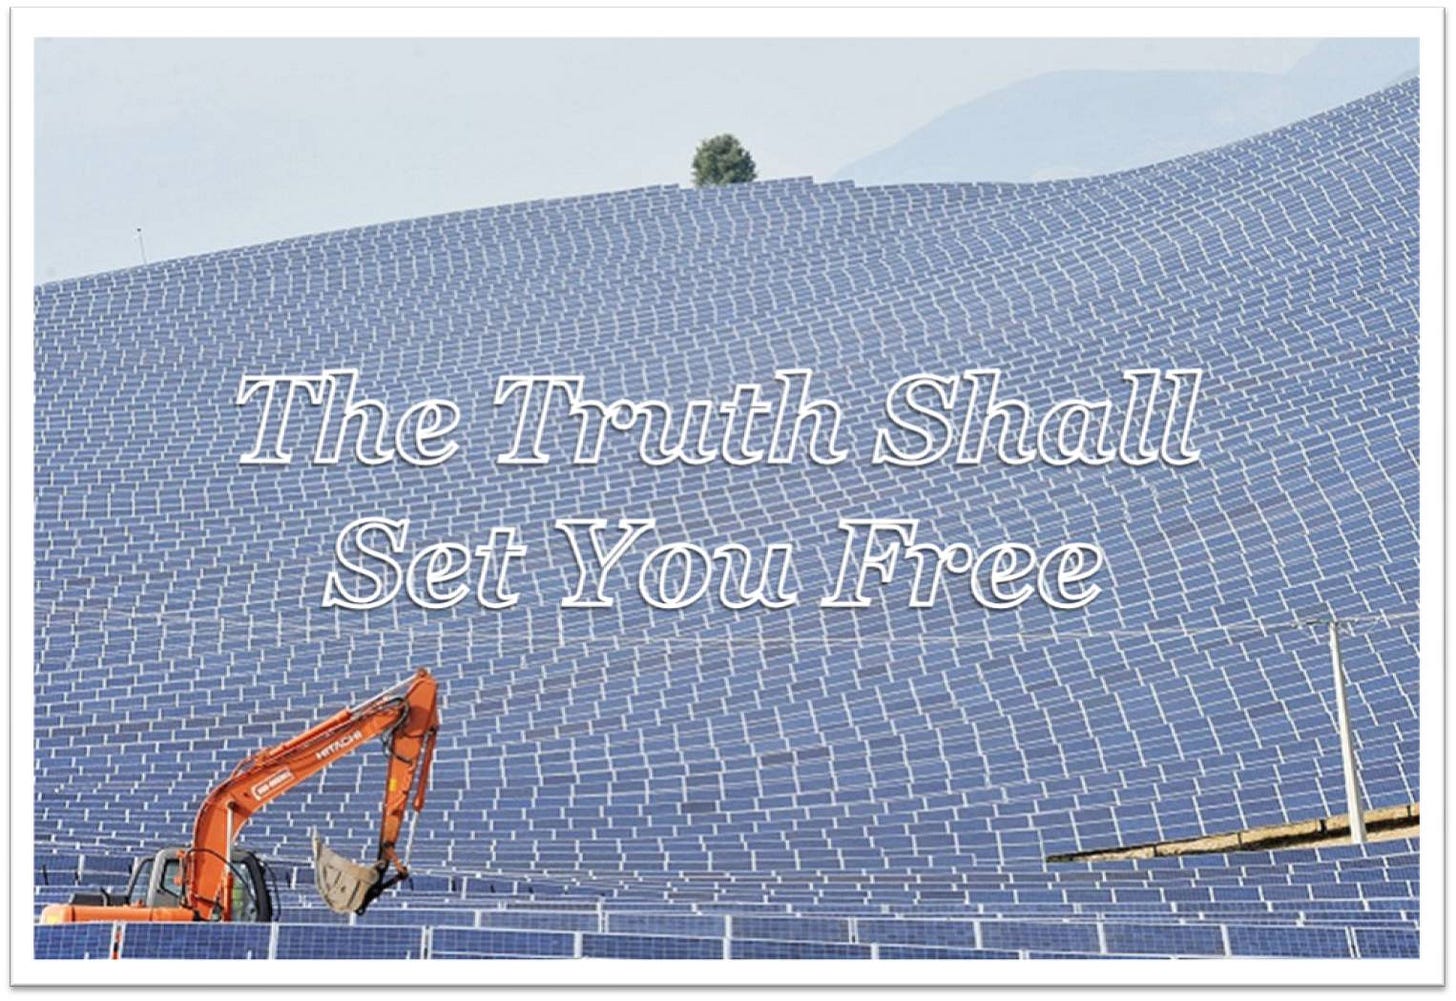 At last an “All-In” LCOE that puts an end to the damned lies that Wind and Solar are cheap!